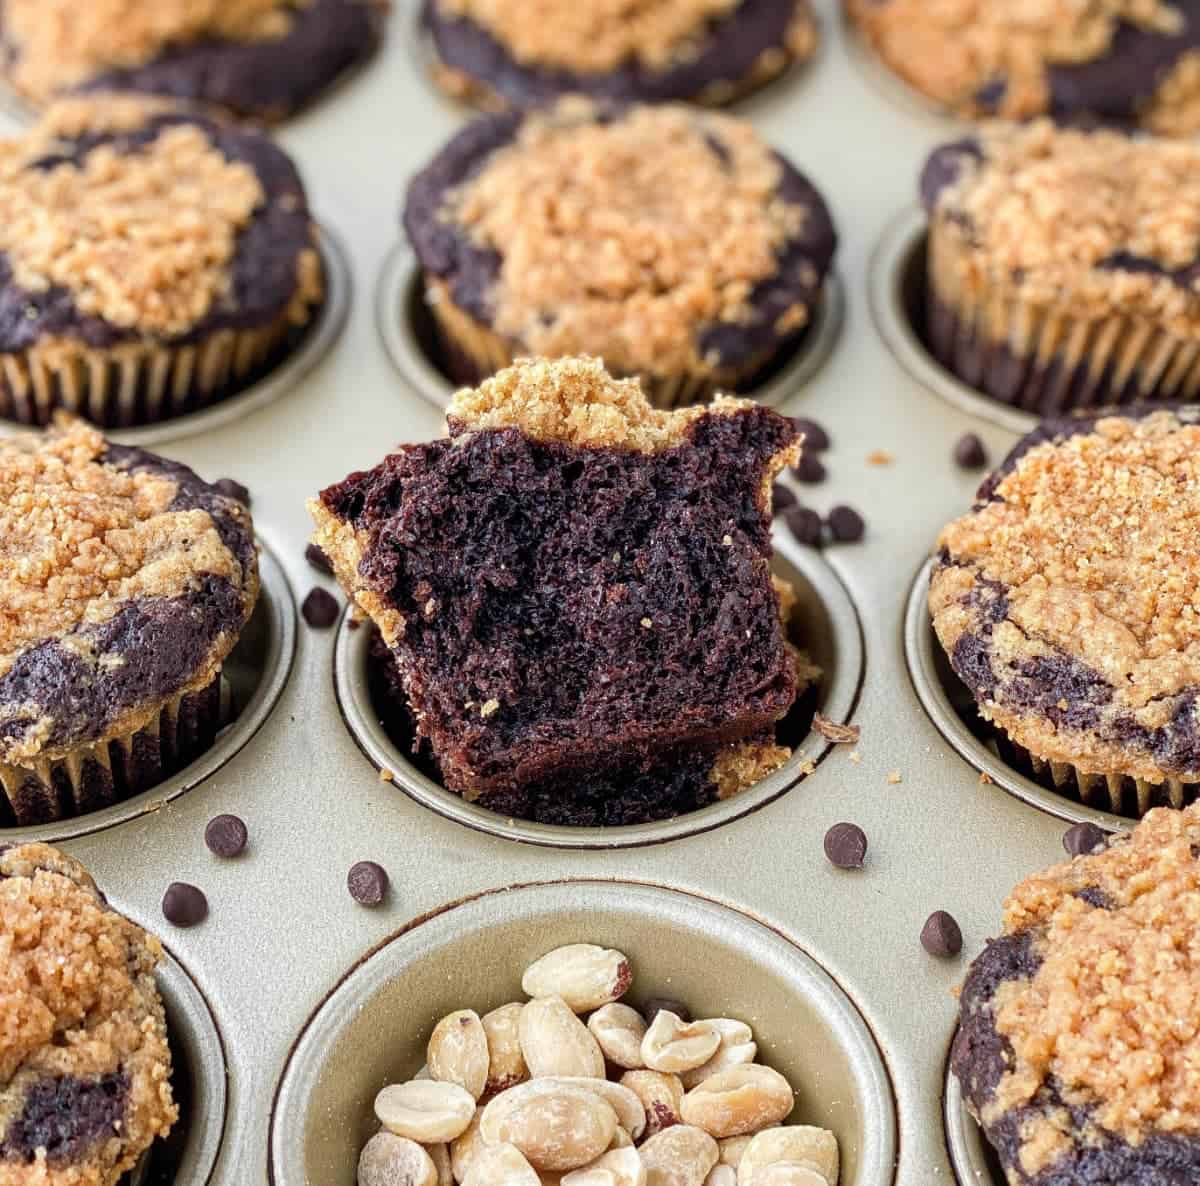 Chocolate Peanut Butter Muffins in a pan with scattered peanuts and chocolate chips.